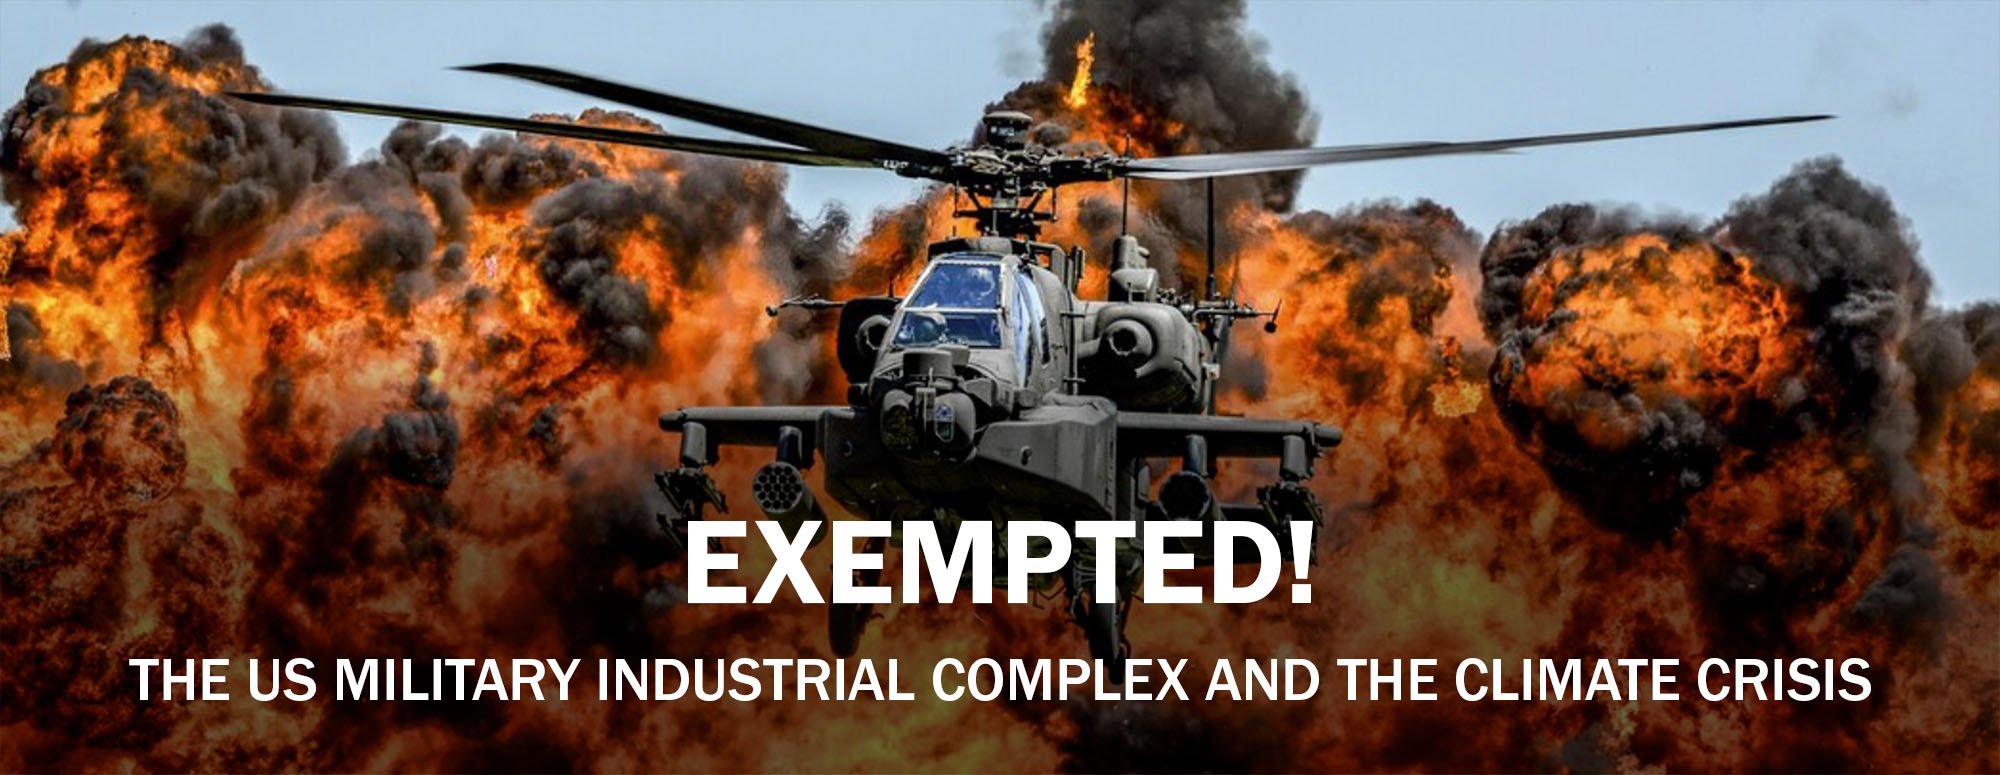 An attack helicopter with a fiery explosion in background. White text overlaid.